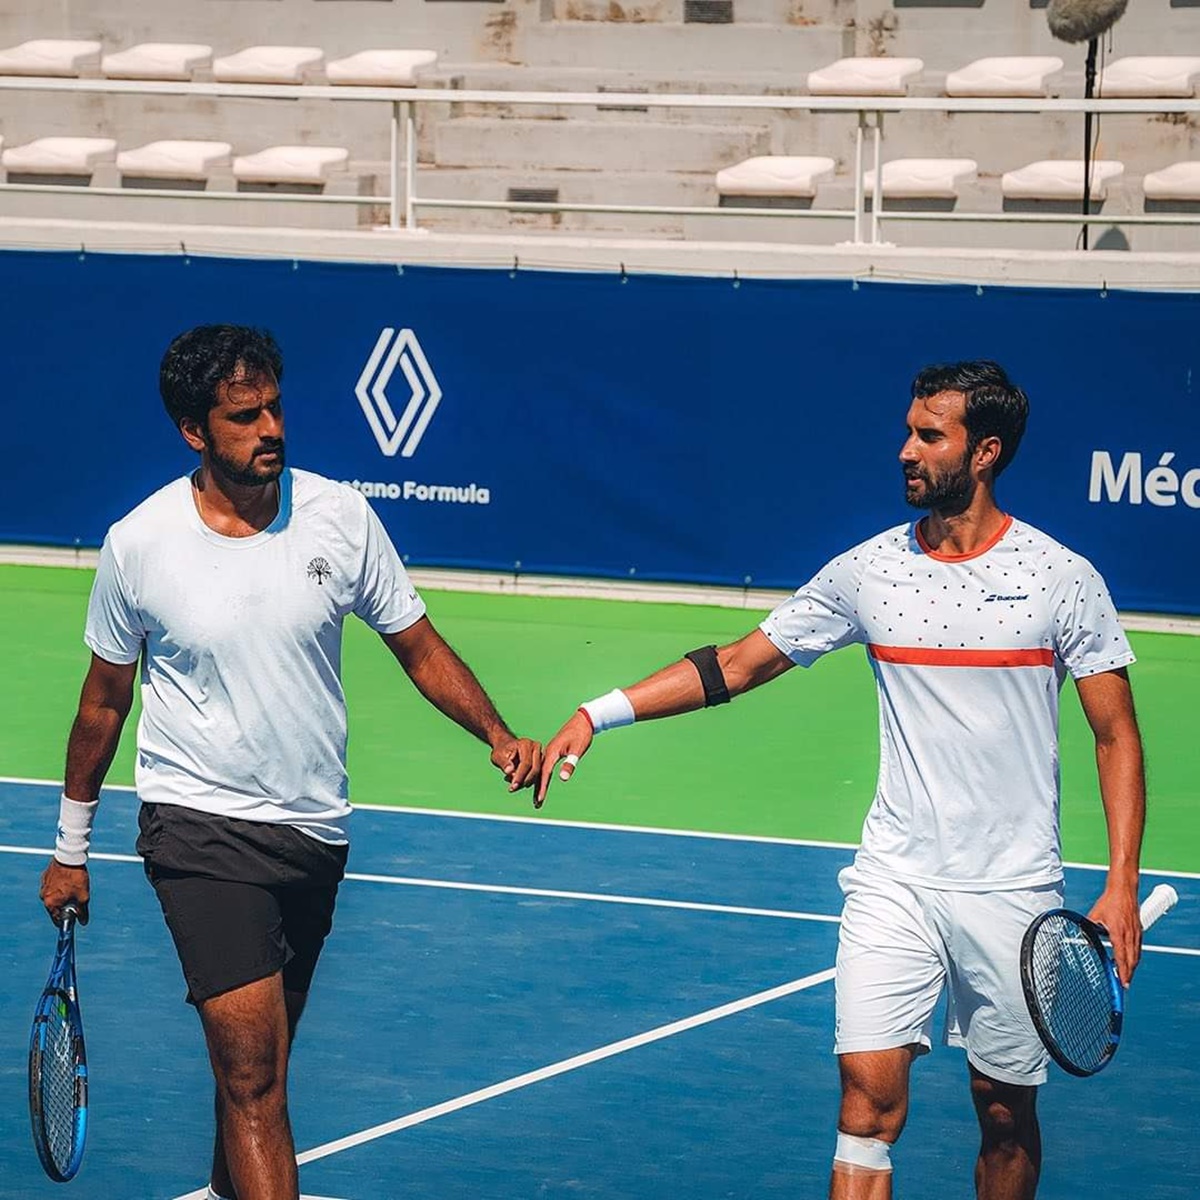 India’s Yuki Bhambri and Saketh Myneni, who joined forces last year, made six Challenger finals and won five of them between April and October last year.